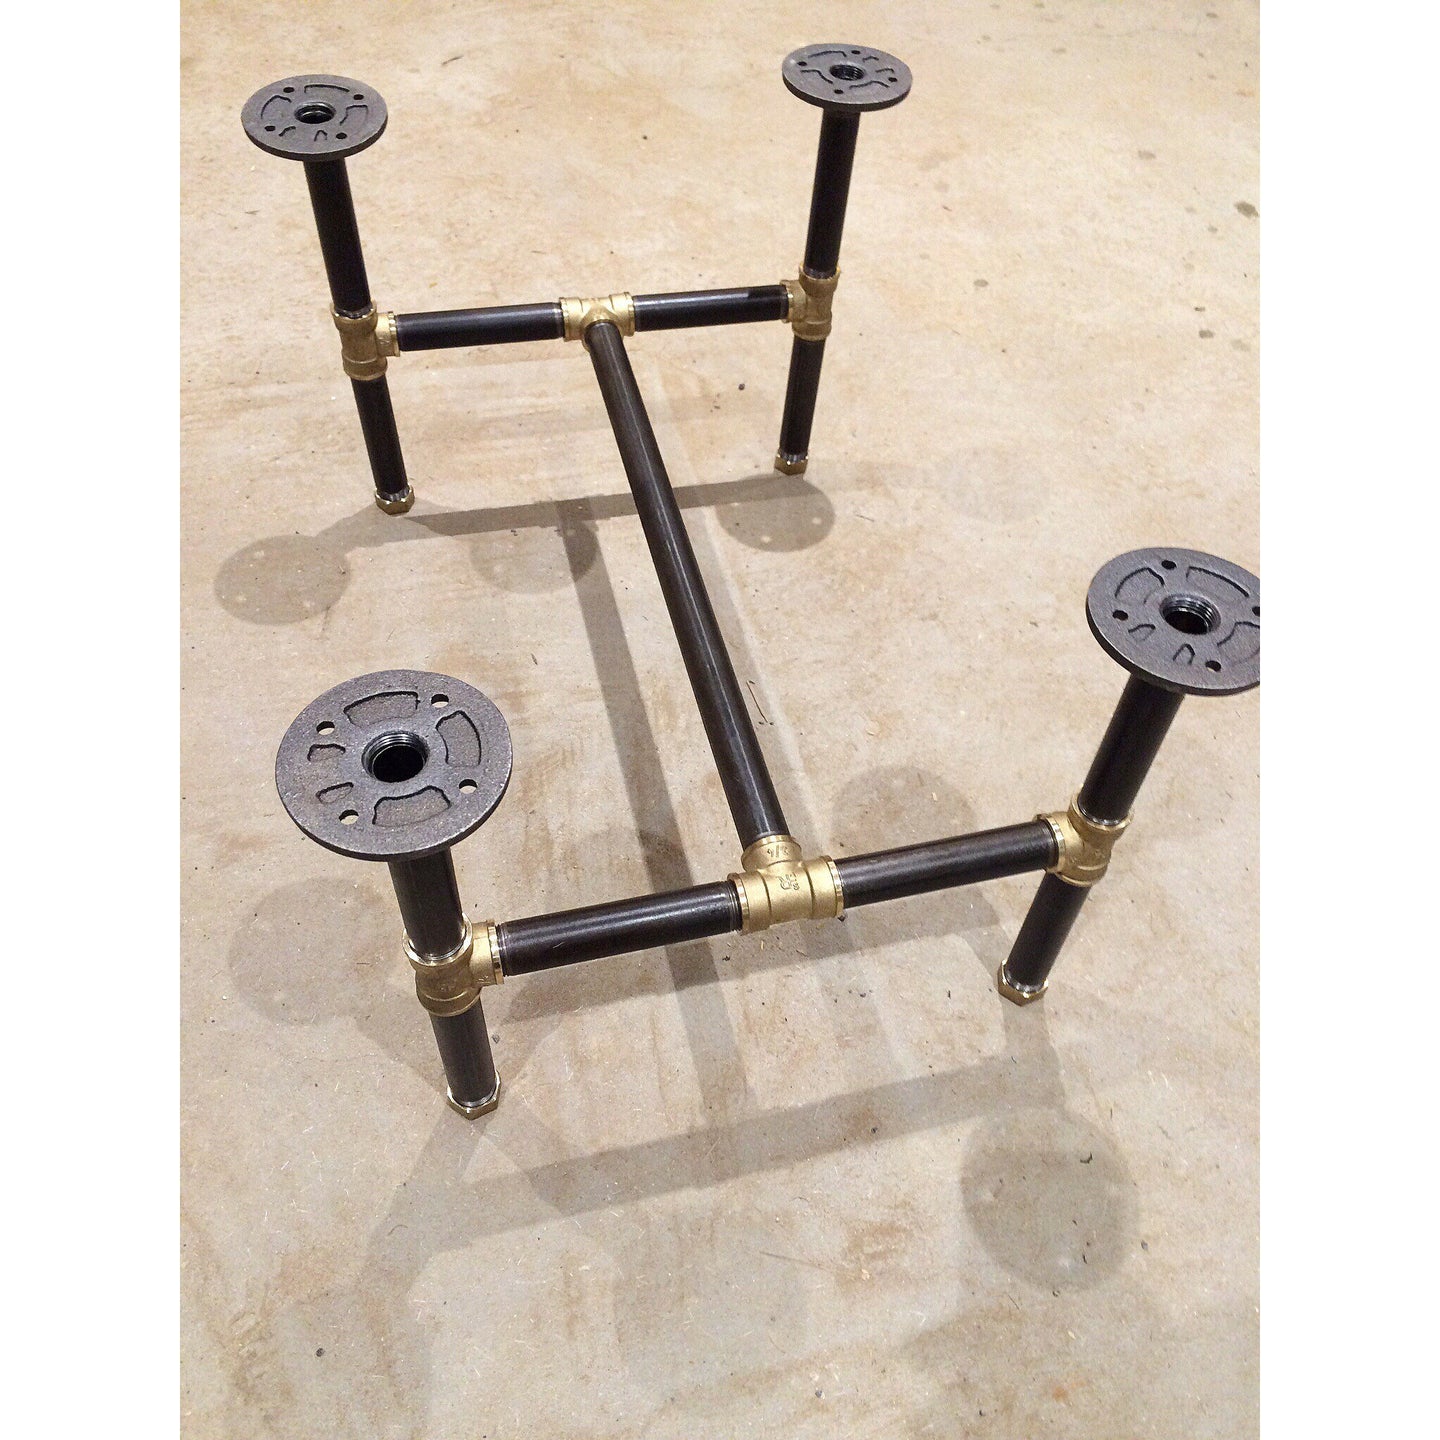 Black steel pipe legs with brass accents